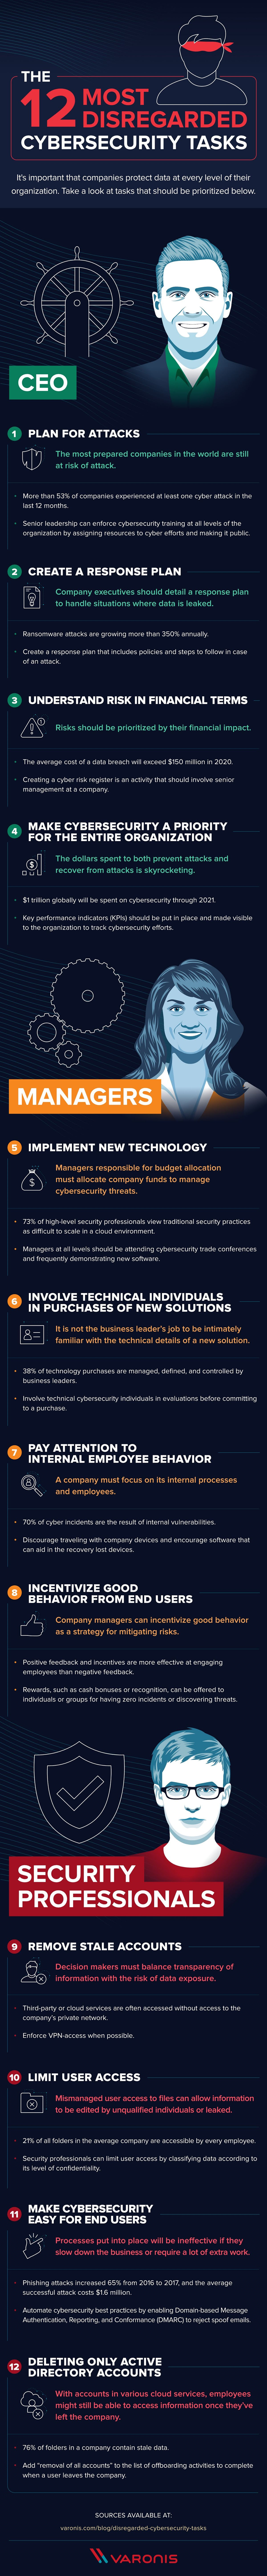 12 Most Disregarded Cybersecurity Tasks #infographic